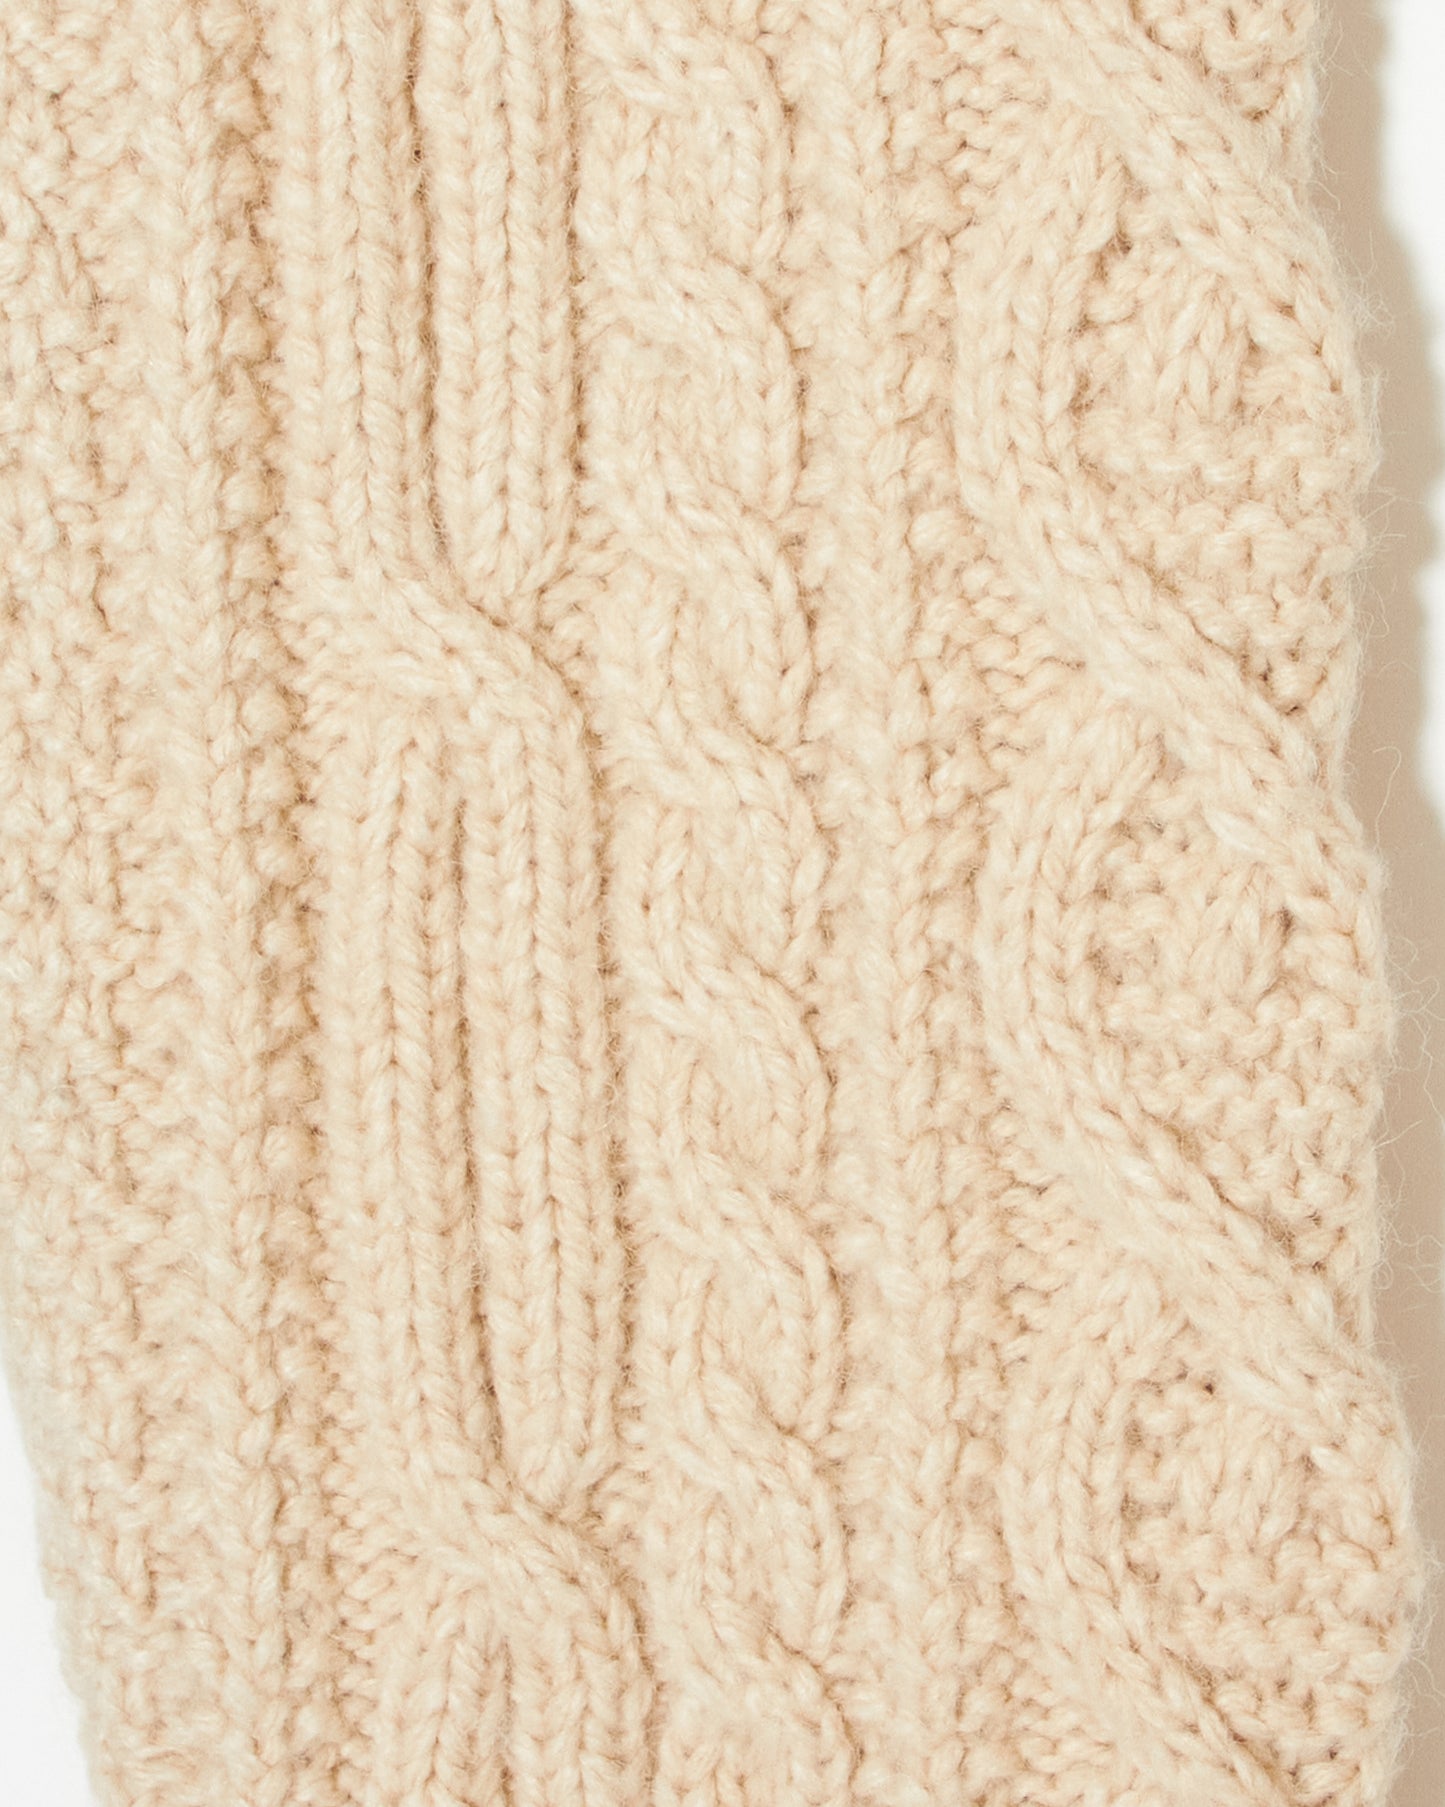 cable knit harness【Delivery in March 2023】